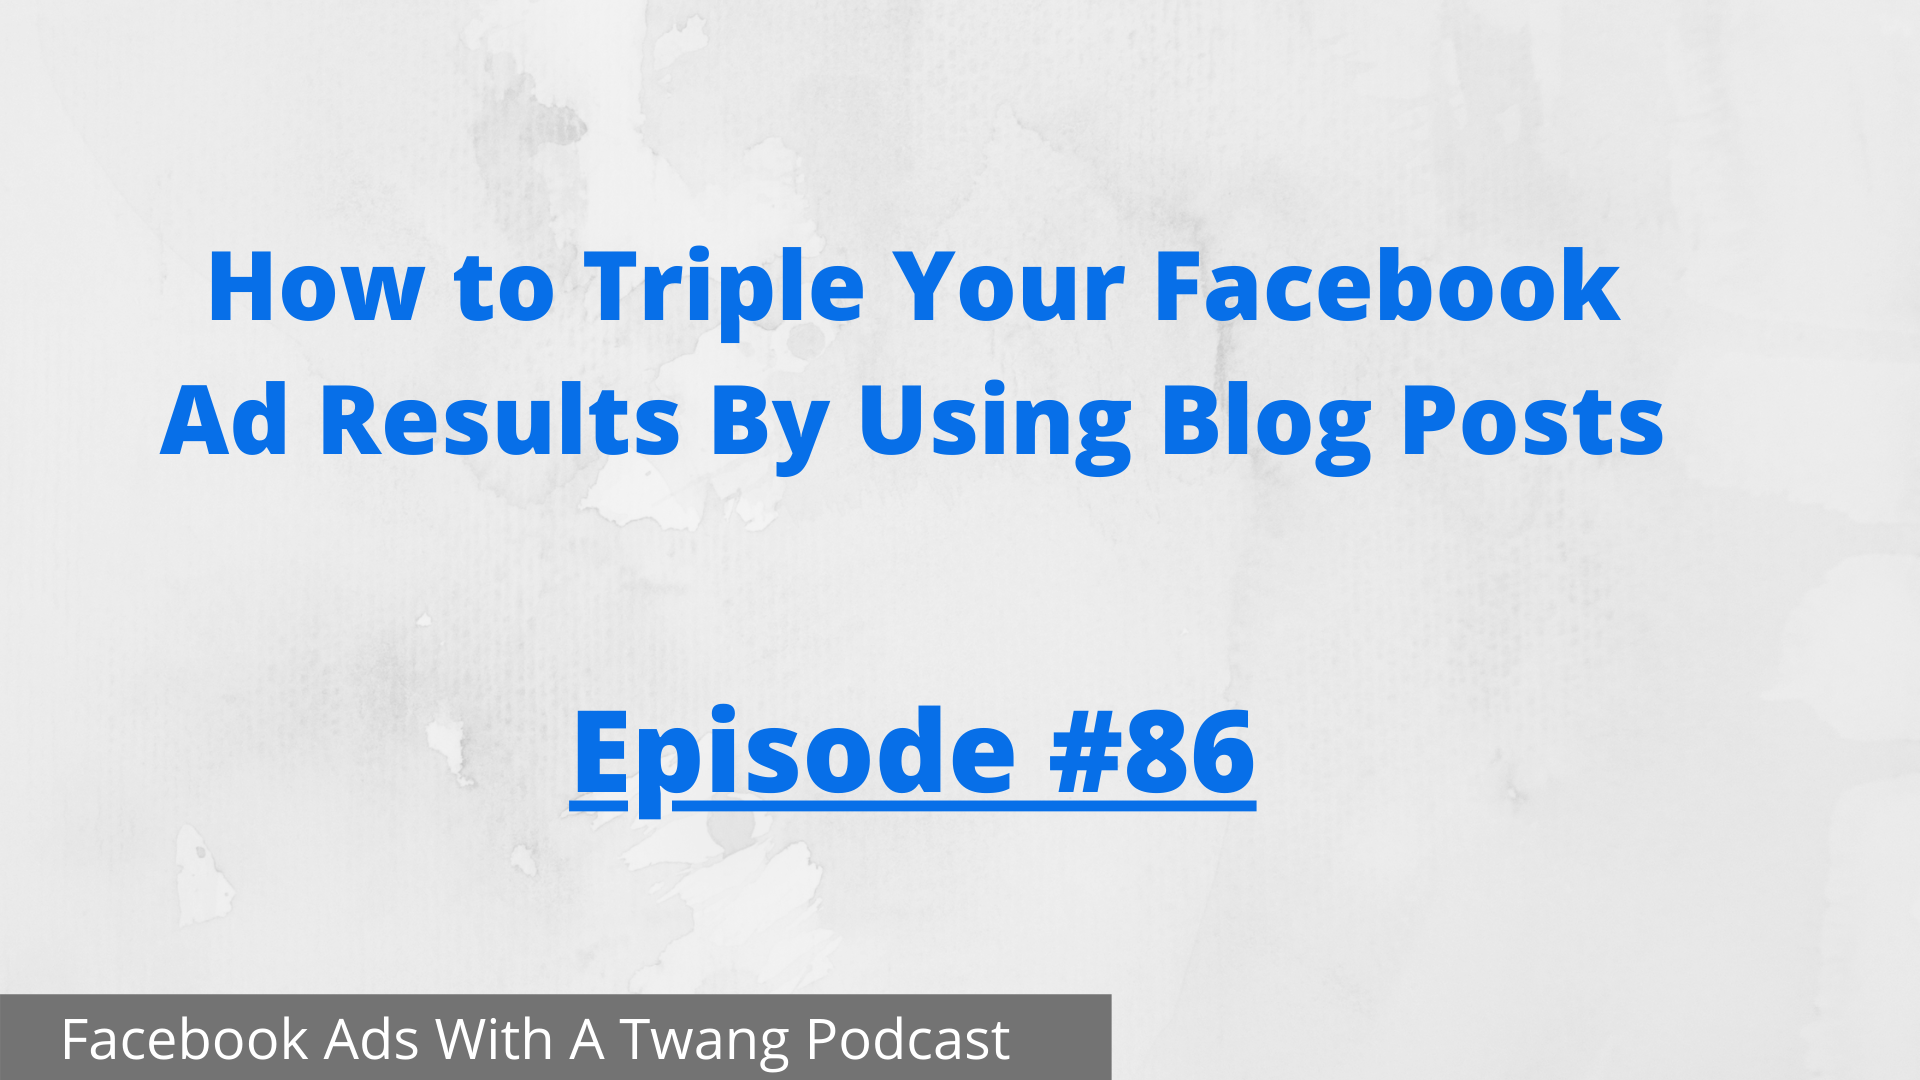 Episode #86 -  How to triple your Facebook ad results using blogs